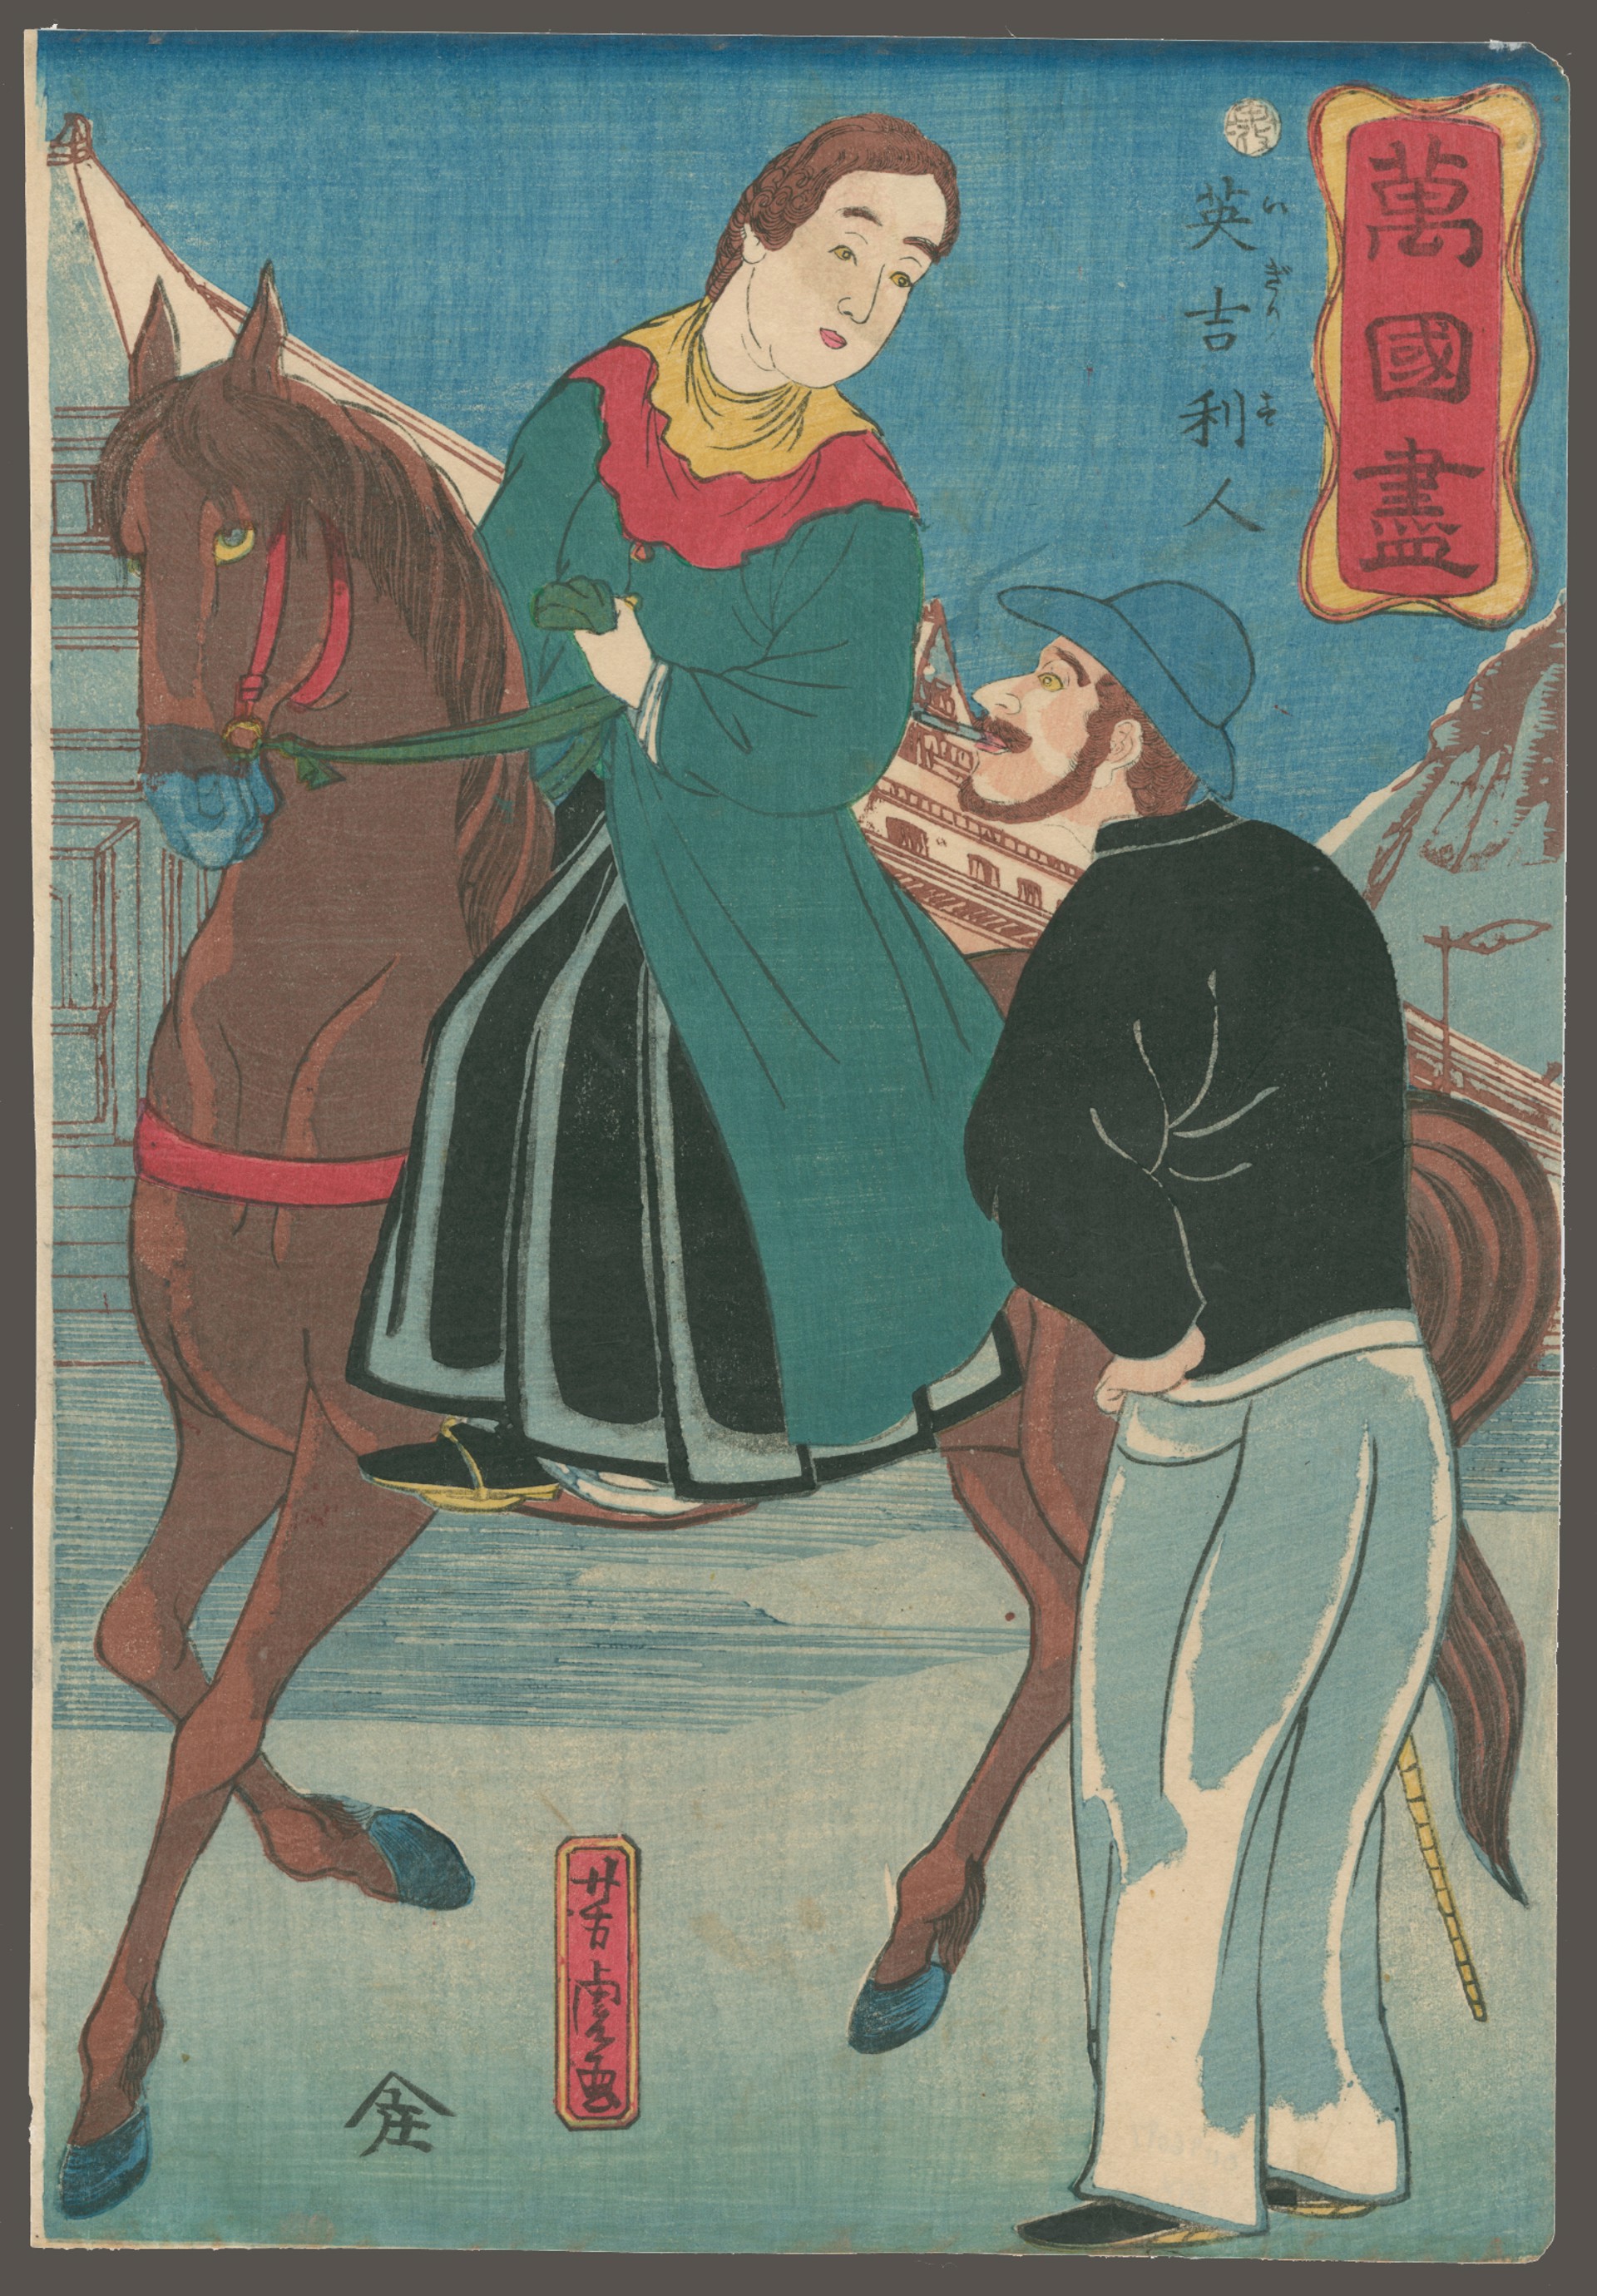 An Englishman Chatting with an English Lady on Horseback Foreigners of Many Countries by Yoshitora